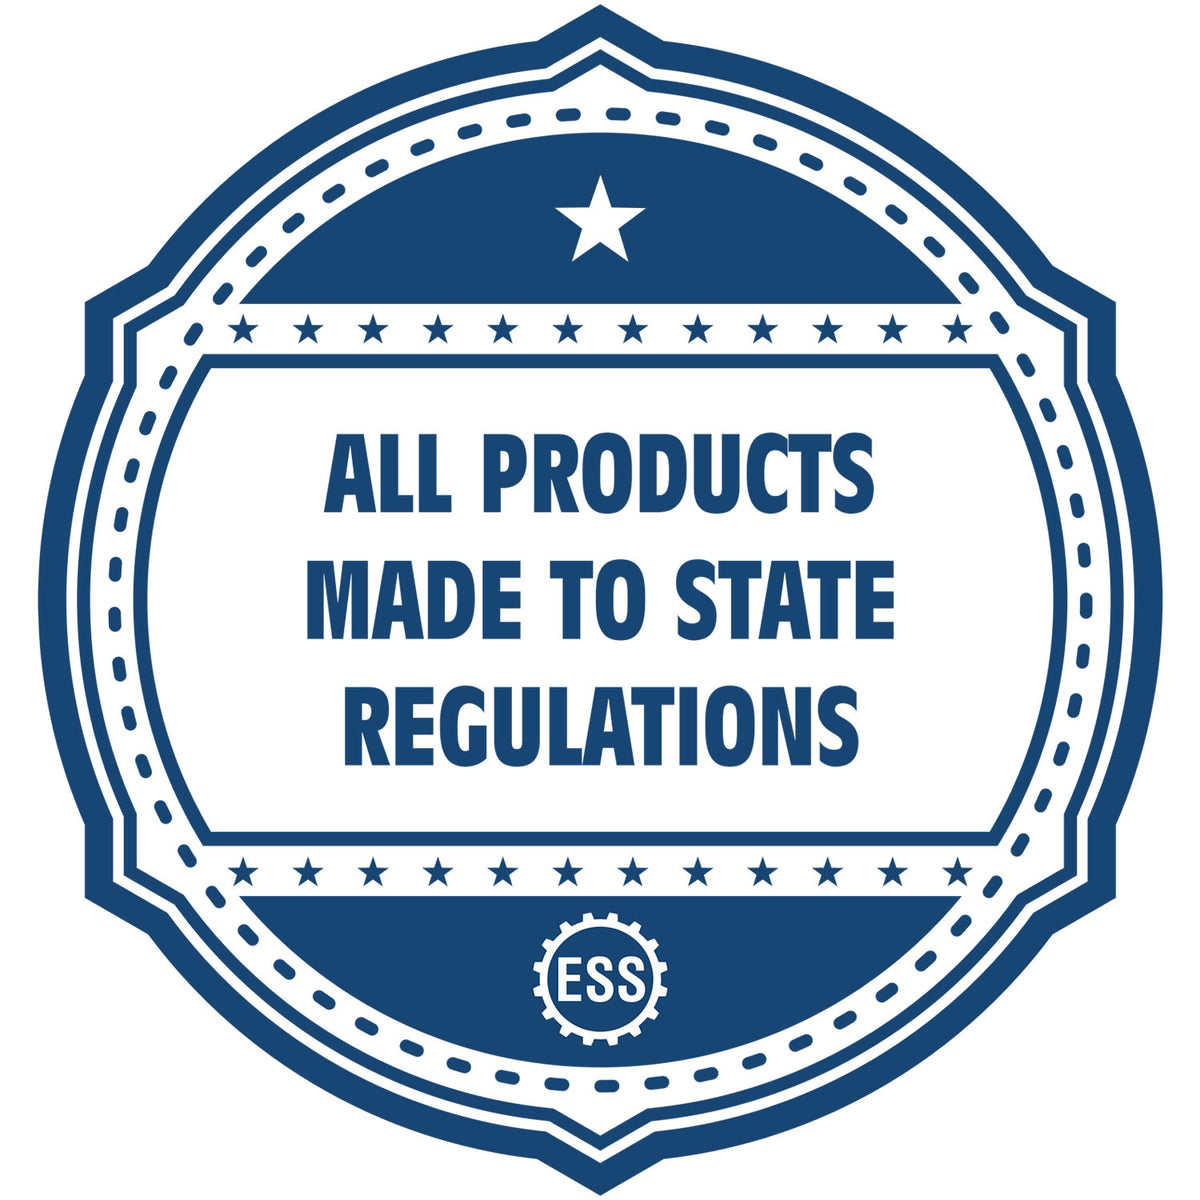 An icon or badge element for the Heavy-Duty Georgia Rectangular Notary Stamp showing that this product is made in compliance with state regulations.